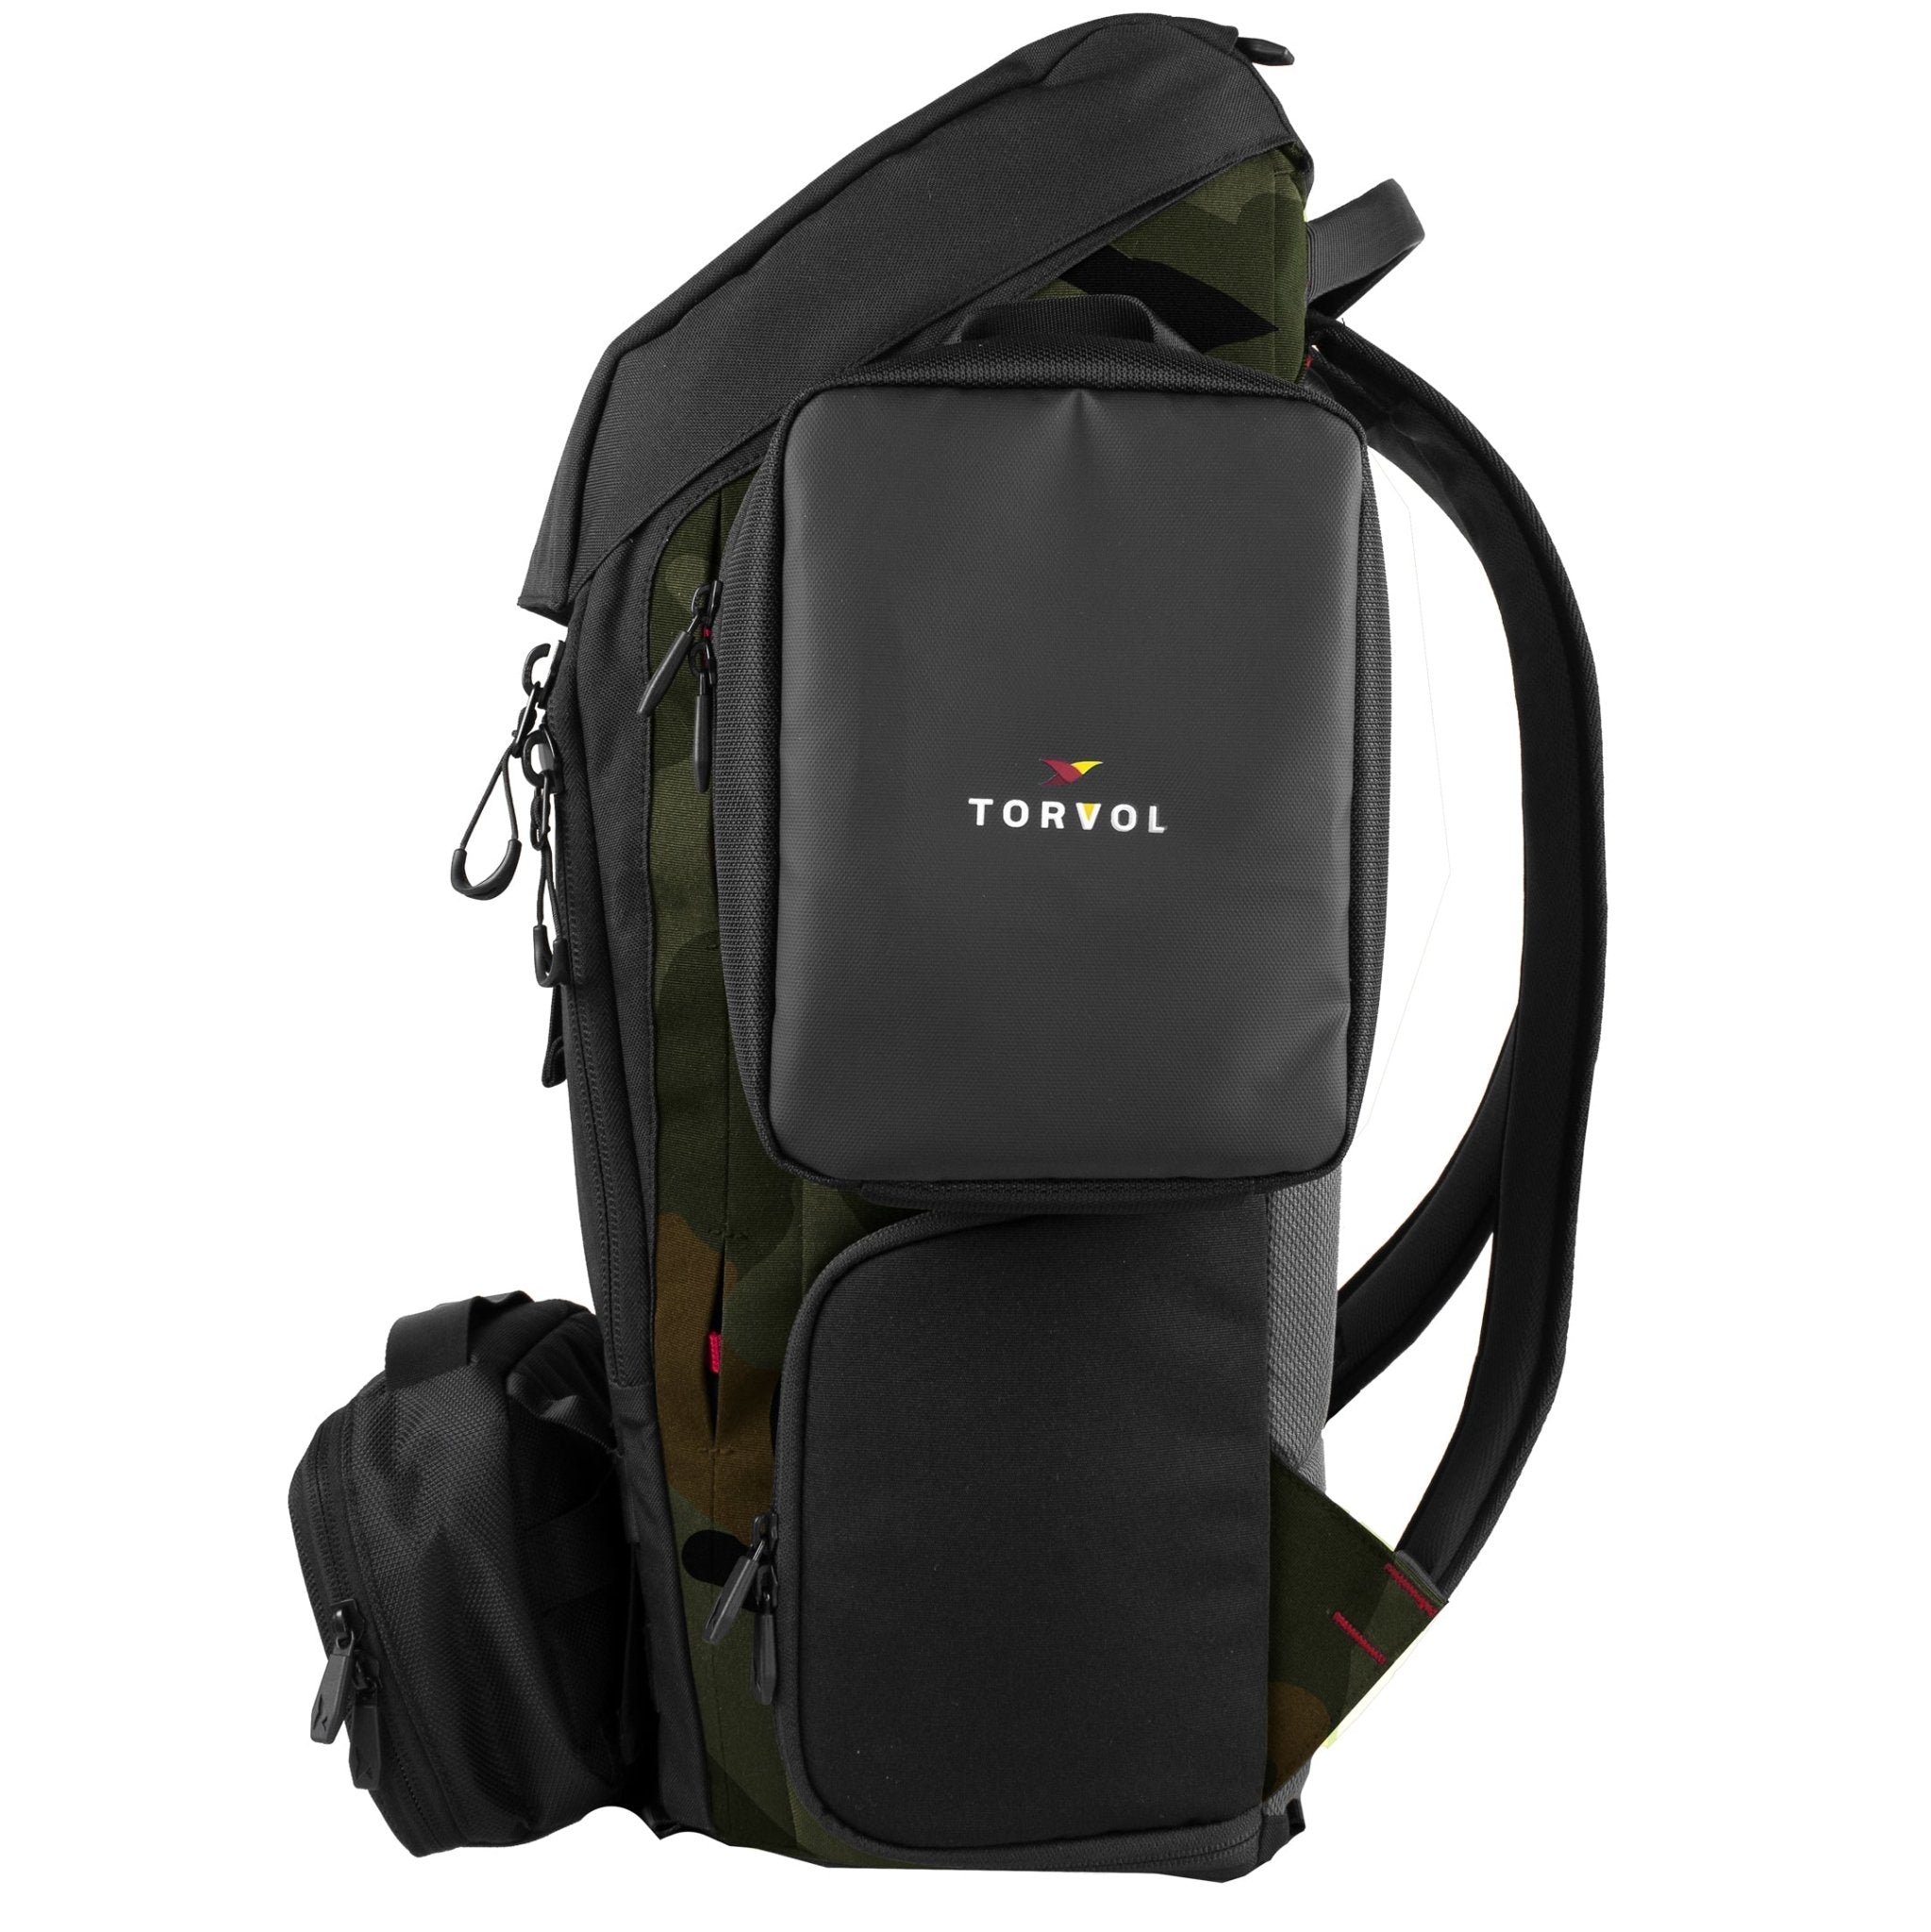 Torvol Urban Carrier Backpack - Your All-Round Freestyle Backpack 19 - Torvol - Drone Authority